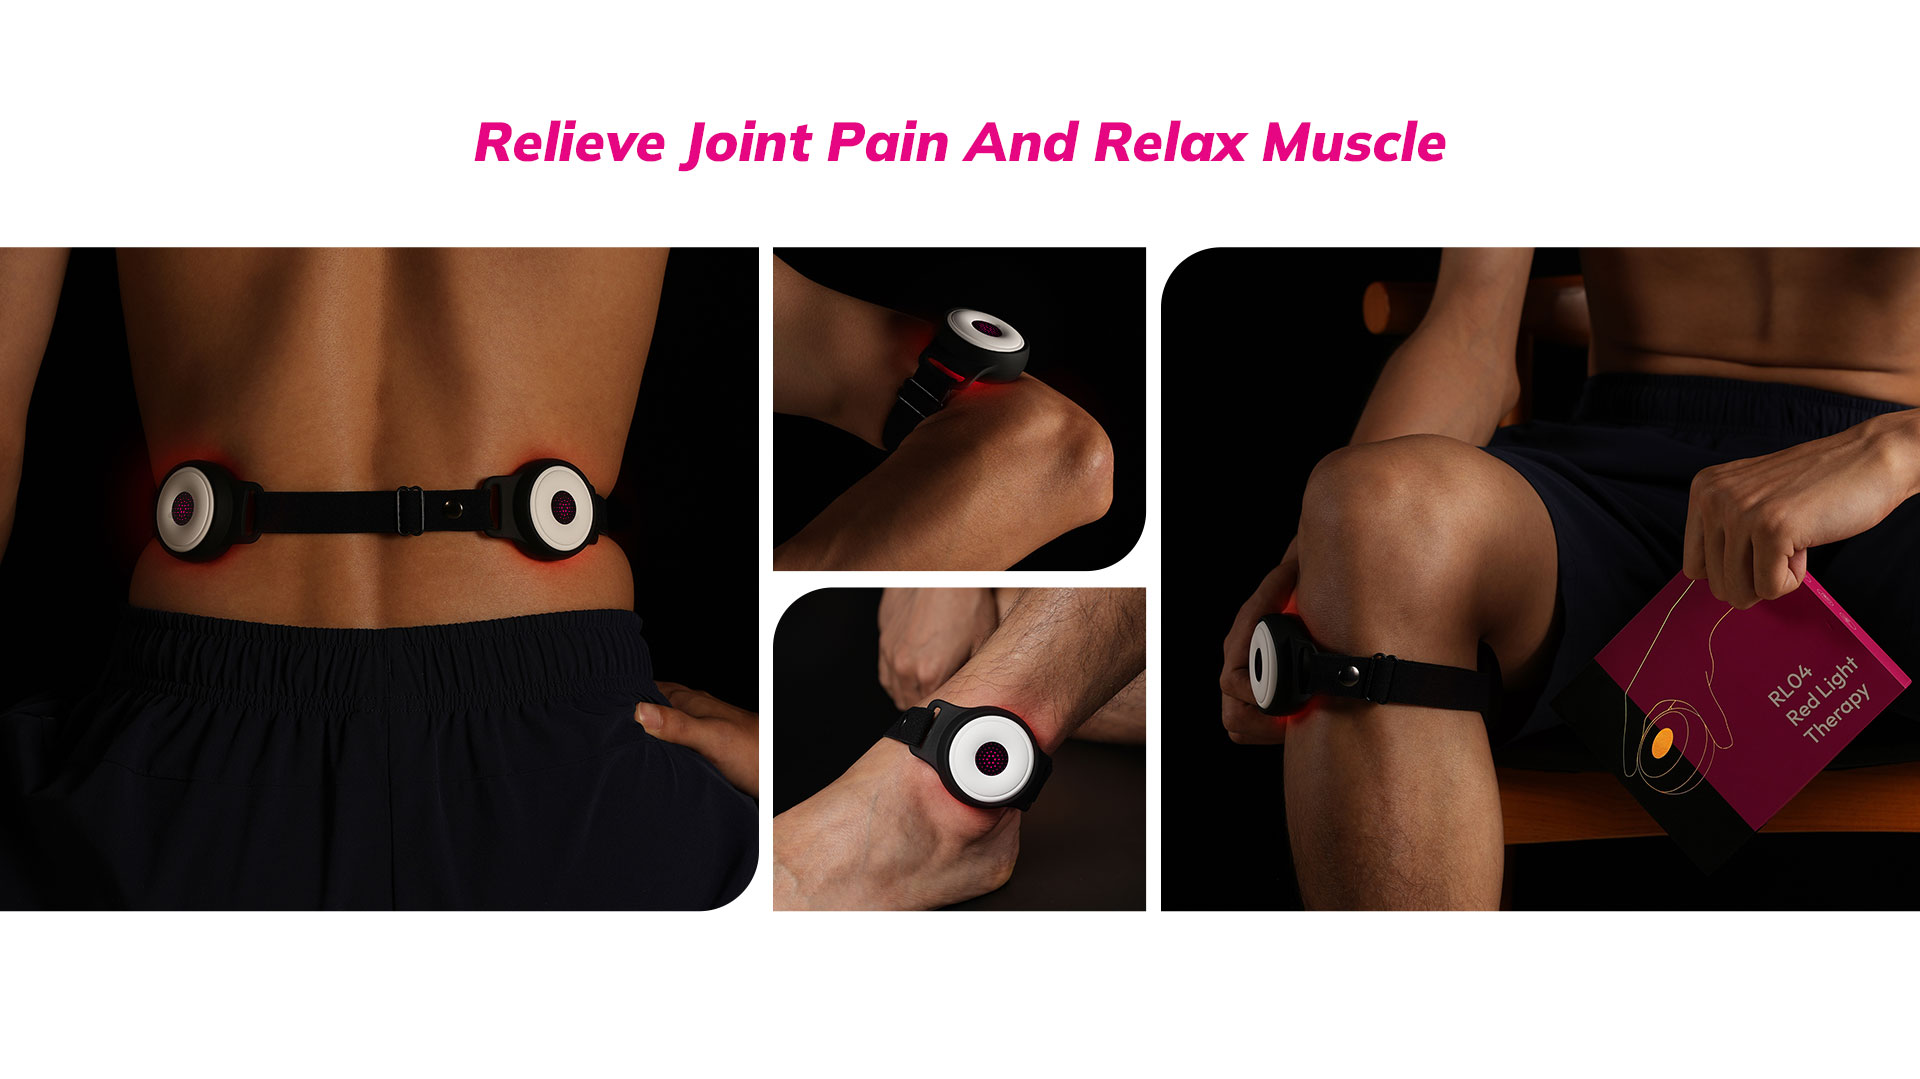 Relieve Joint Pain And Relax Muscle 01